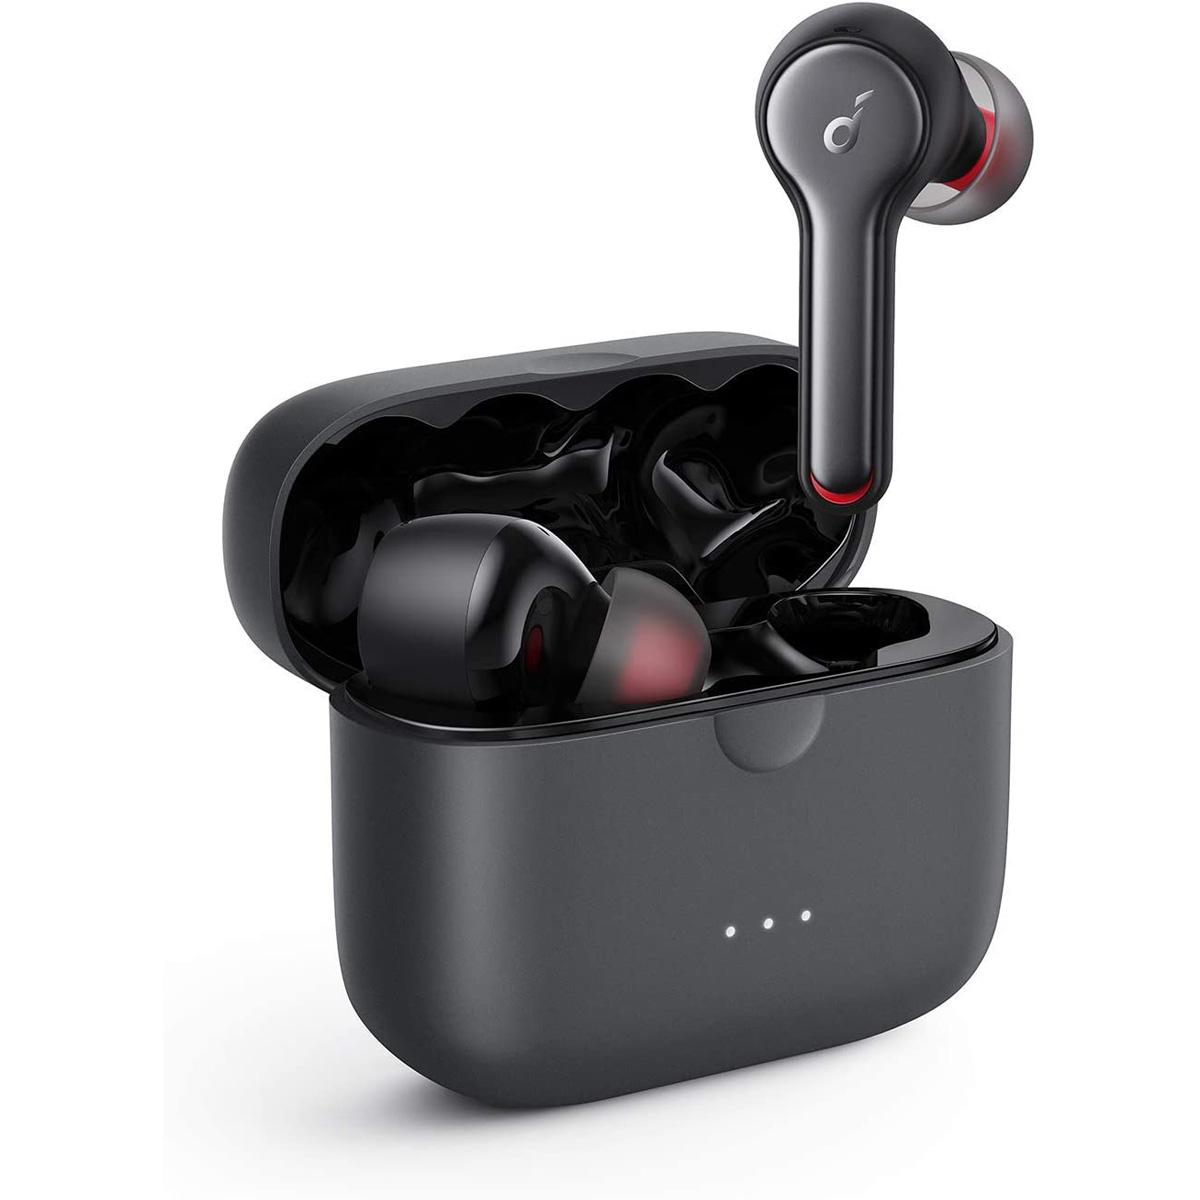 Anker Soundcore Liberty Air 2 Wireless Earbuds for $18.89 Shipped